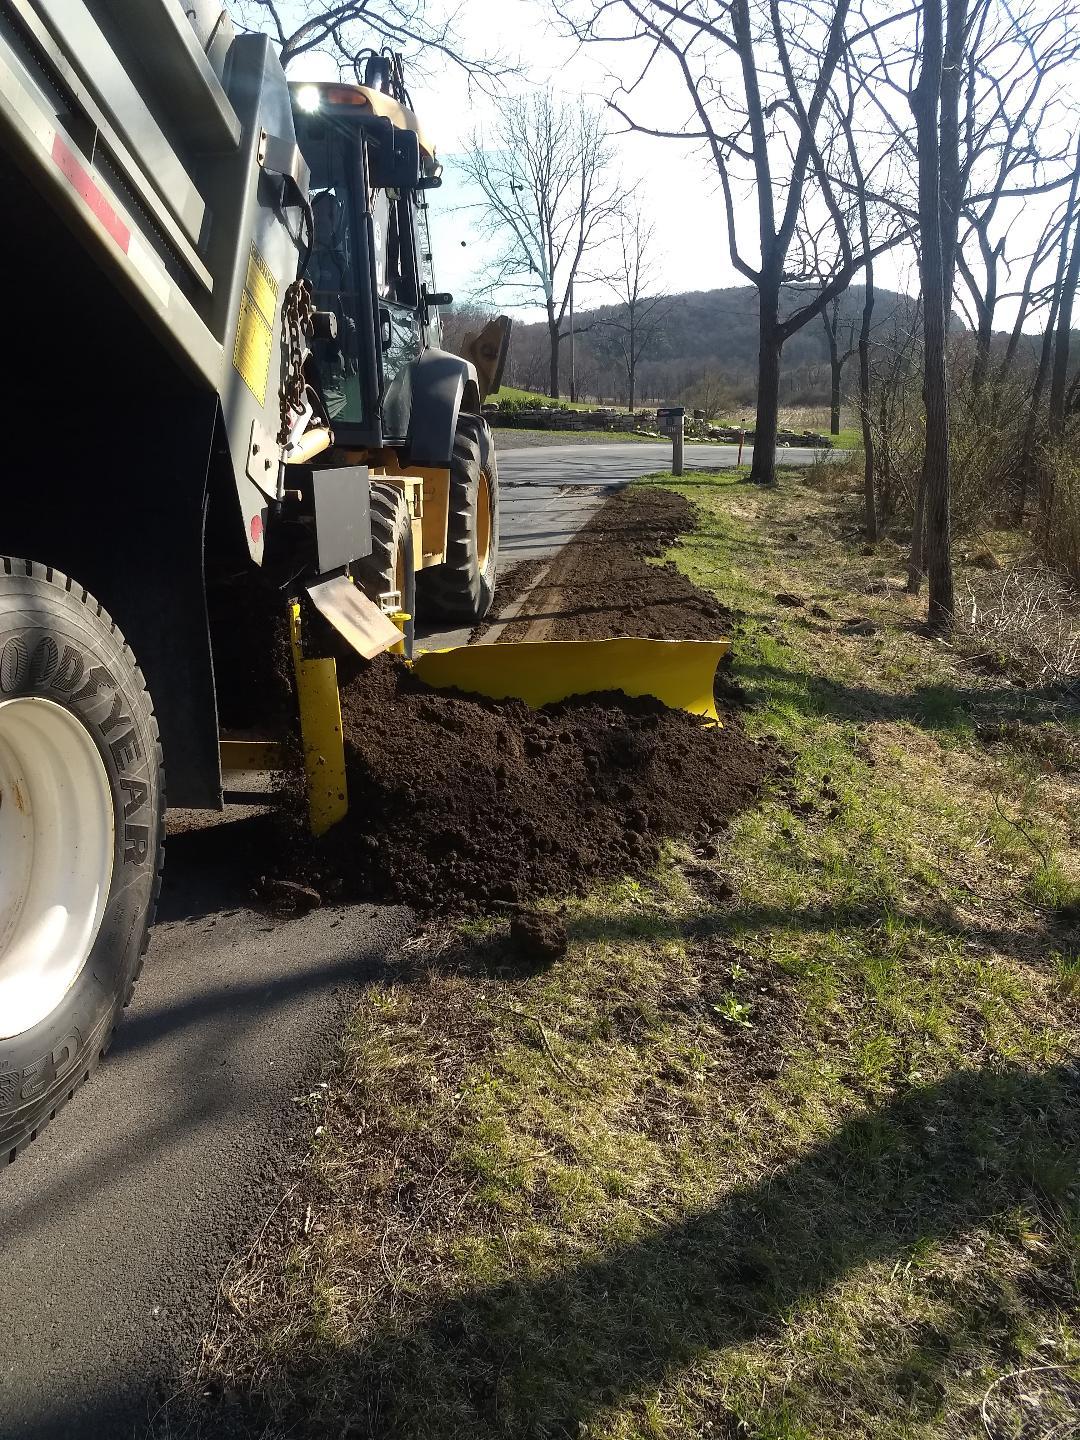 The Sidewinder is an attachment tool for clearing along the roadway